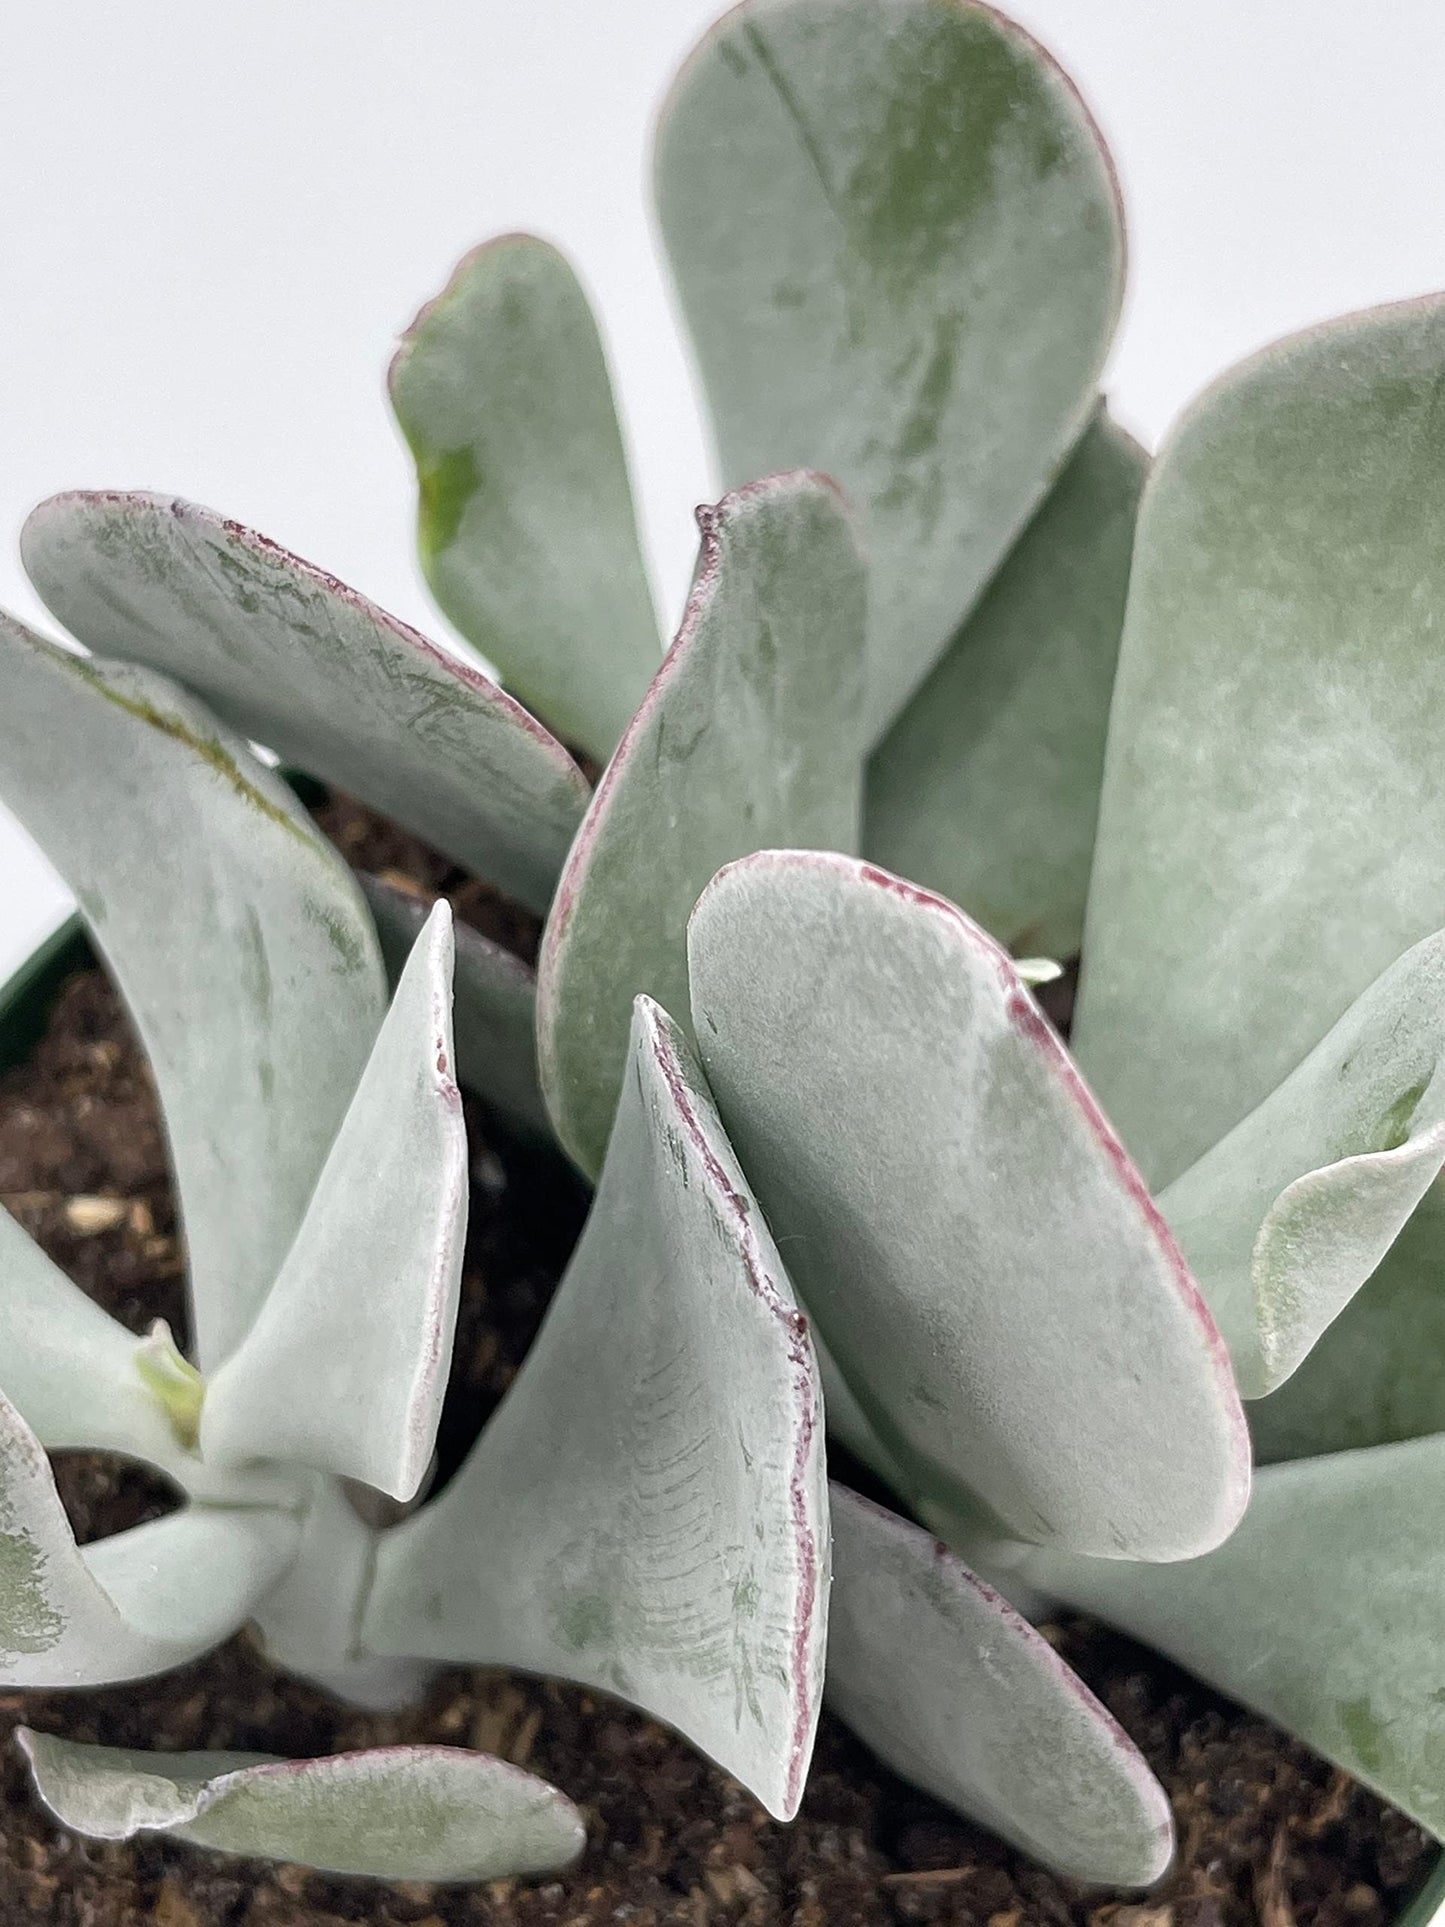 Cotyledon Orbiculata, Pig's Ear, 4 inch Round-leafed Succulent Navel-Wort